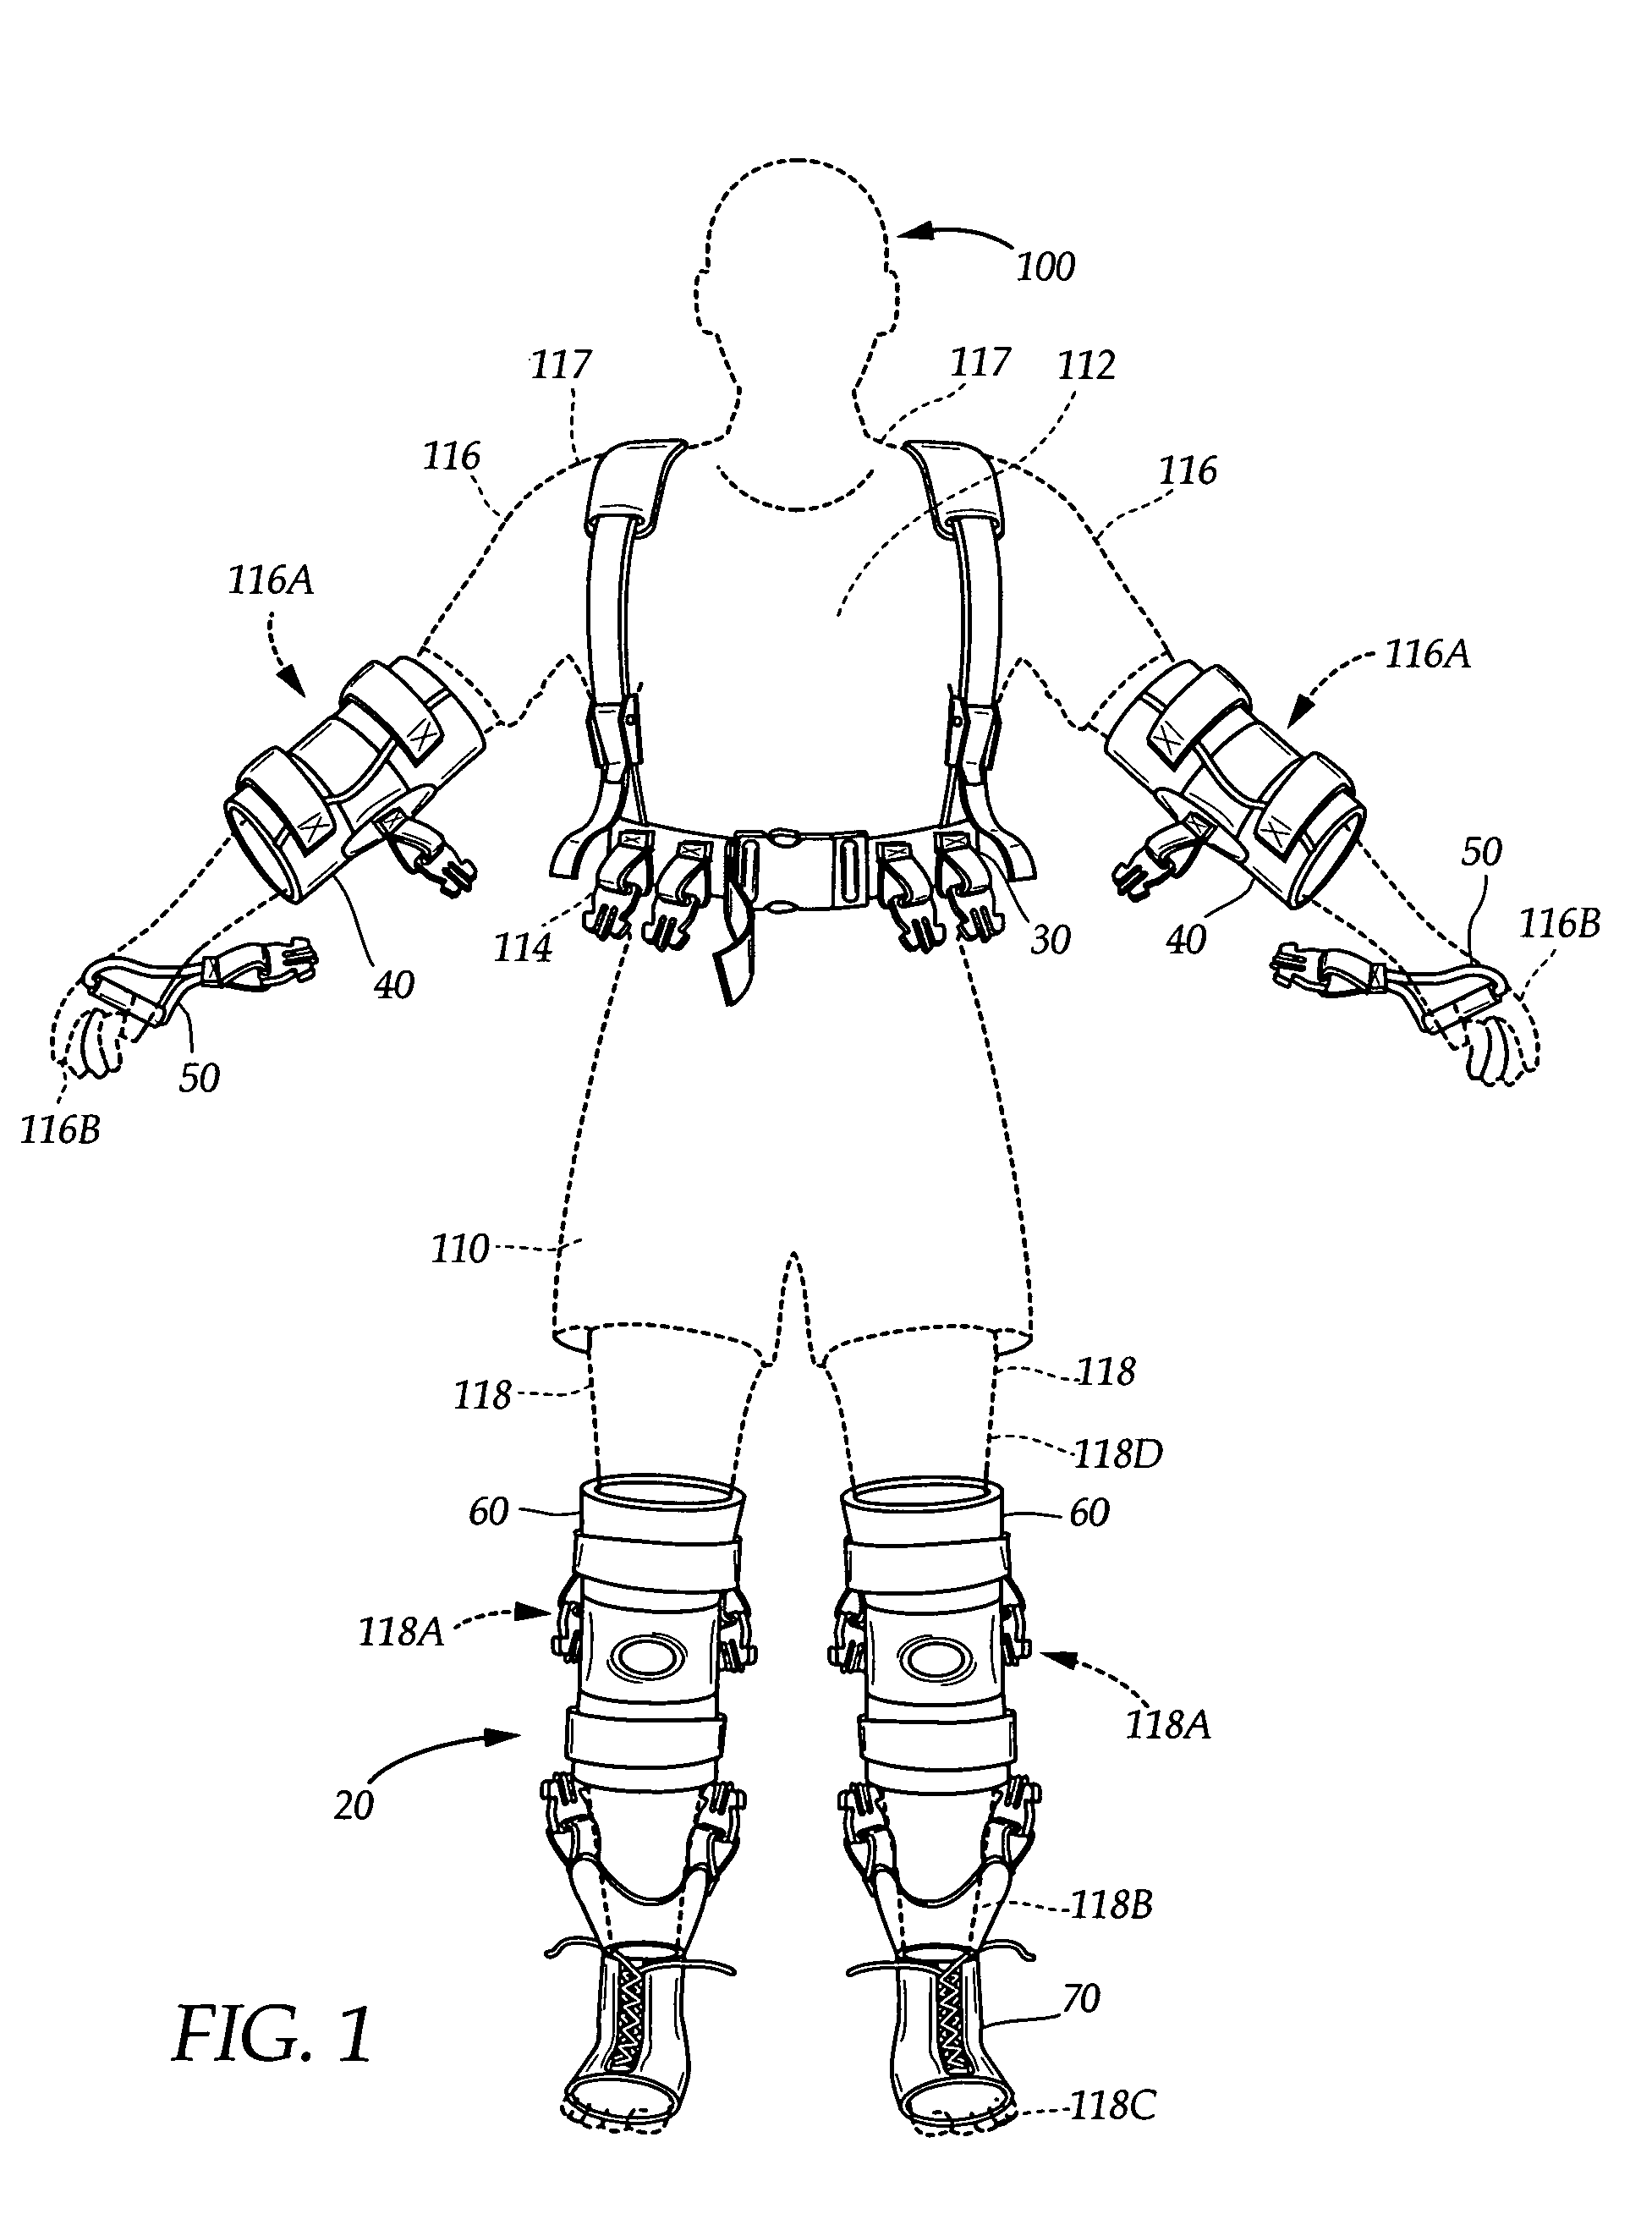 Device for strengthening, training, and rehabilitating isolated muscle groups using elastic resistance elements